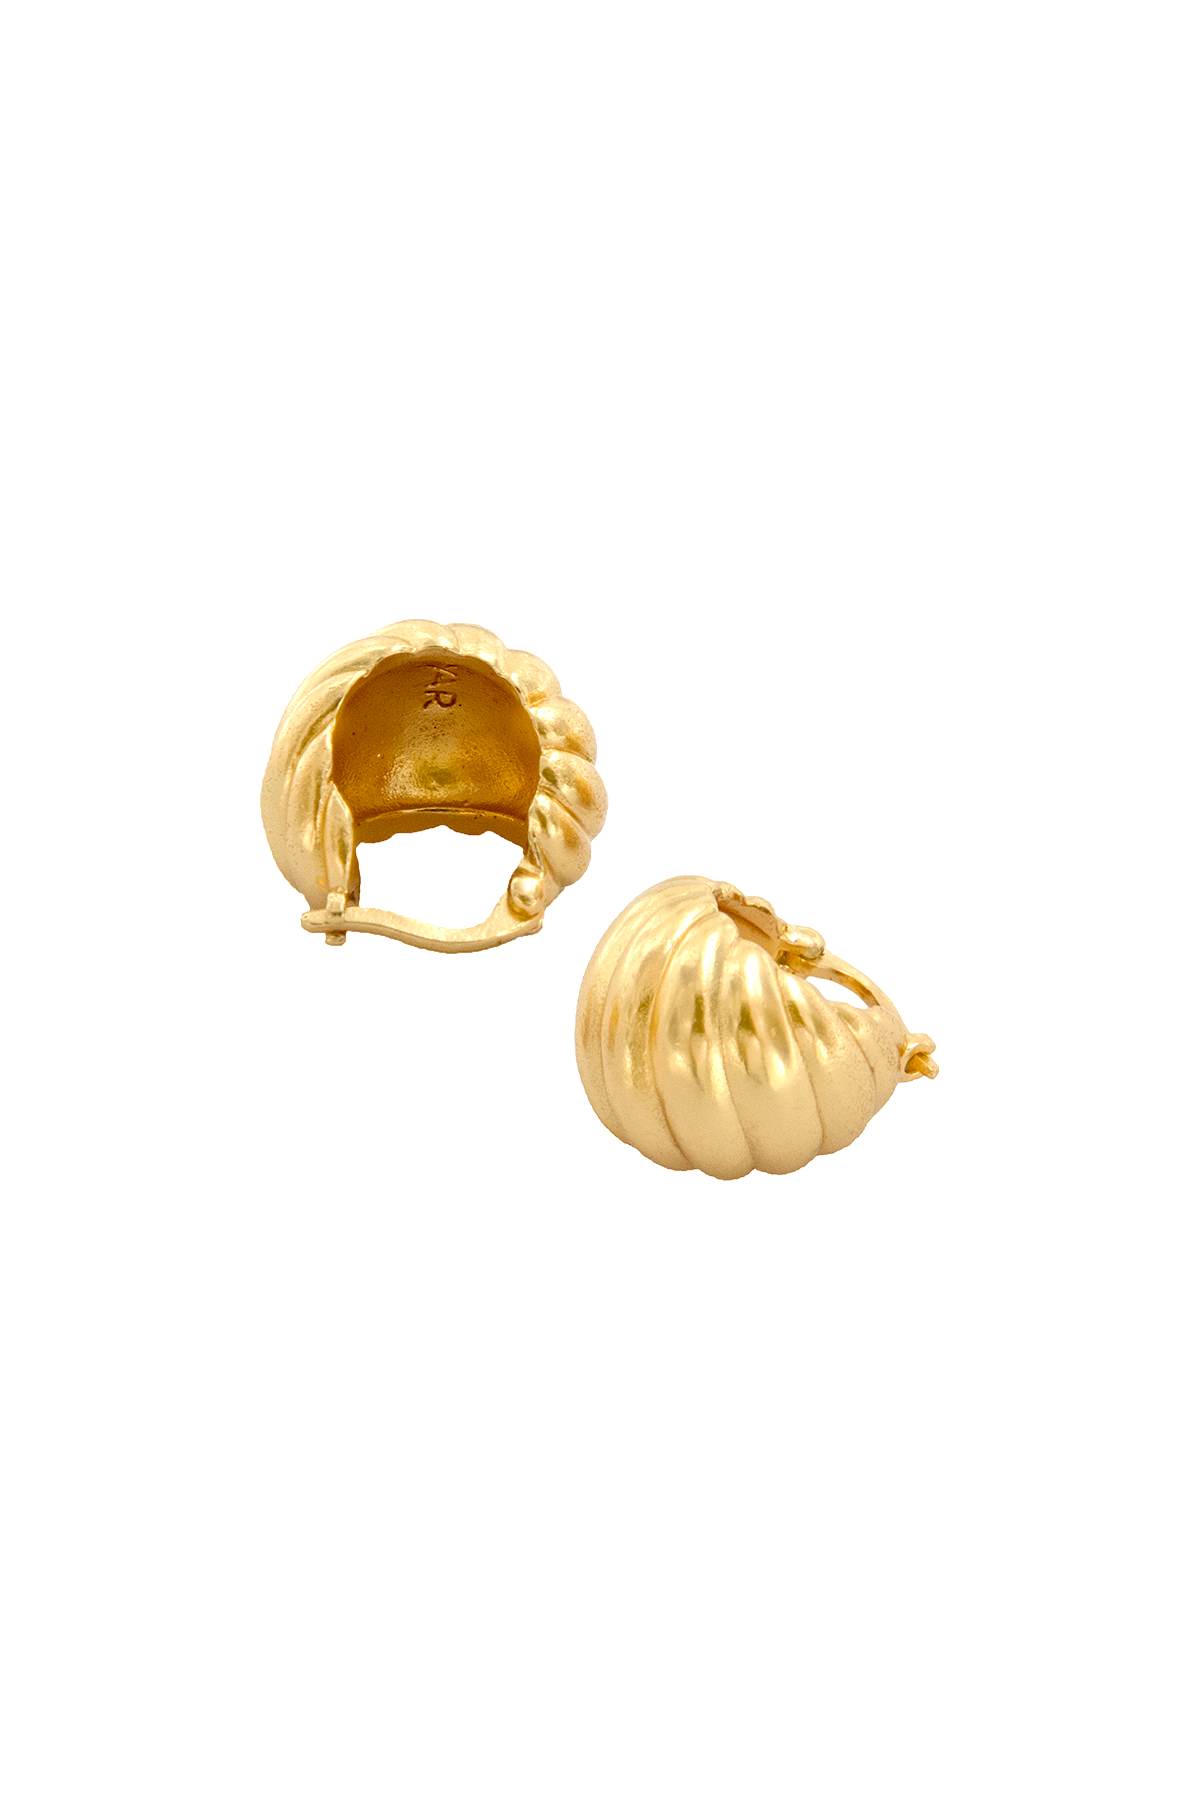 Pyar Venus Gold Hoop Earrings, available on ZERRIN with free shipping in Singapore